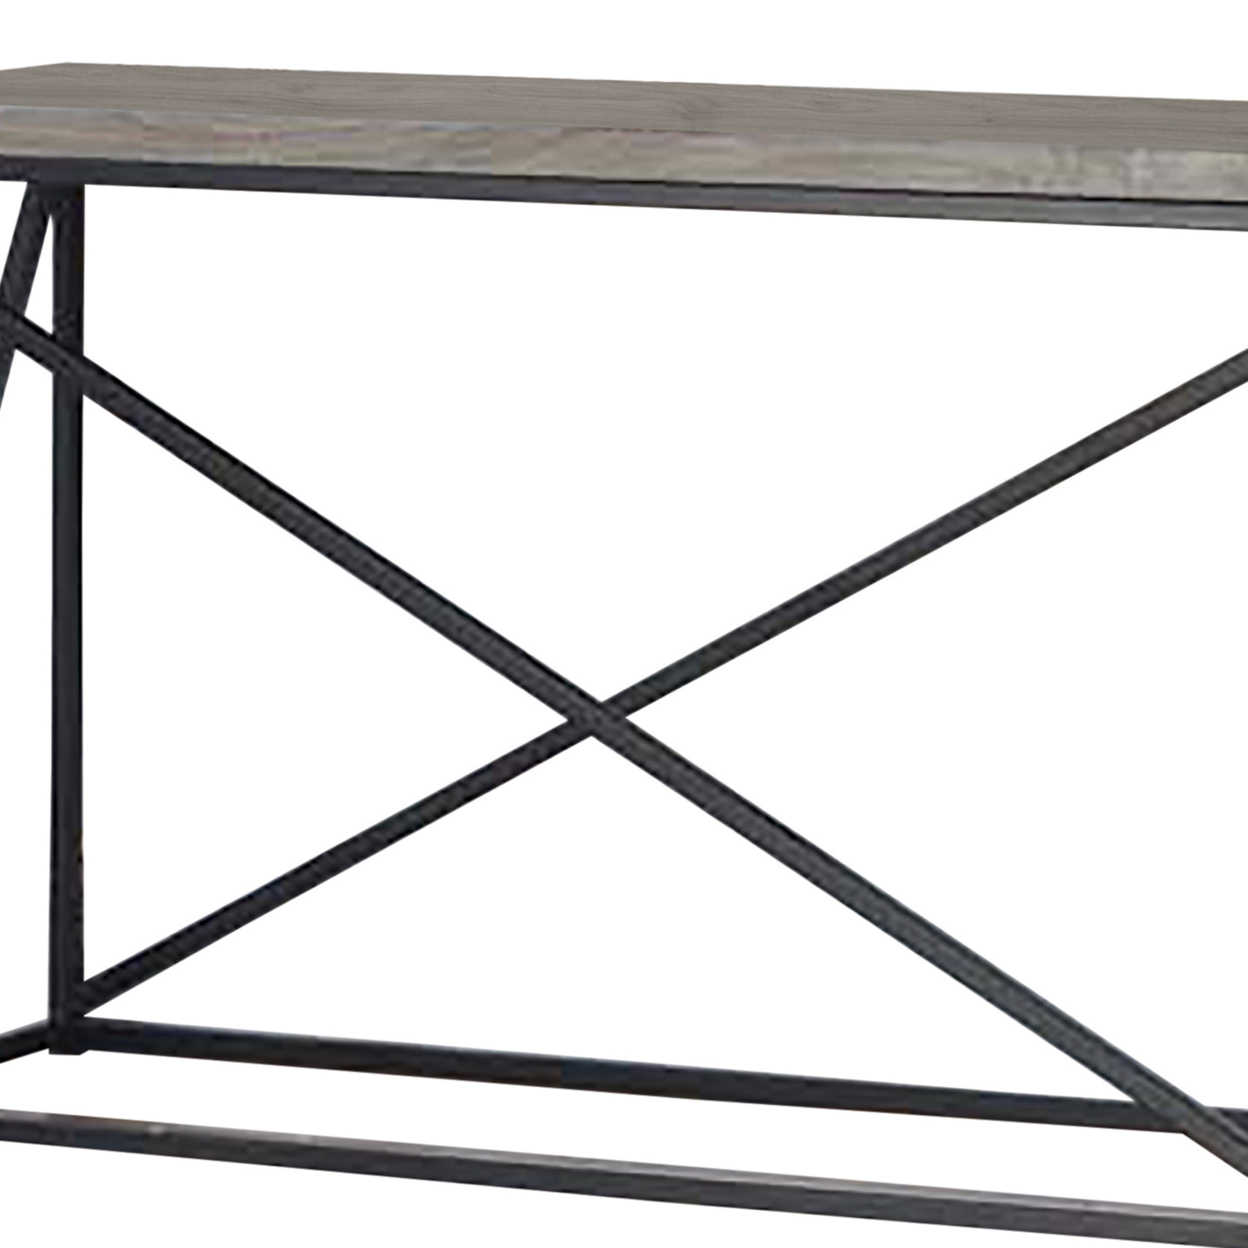 Industrial Style Minimal Sofa Table With Wooden Top And Metallic Base, Sonoma Gray- Saltoro Sherpi